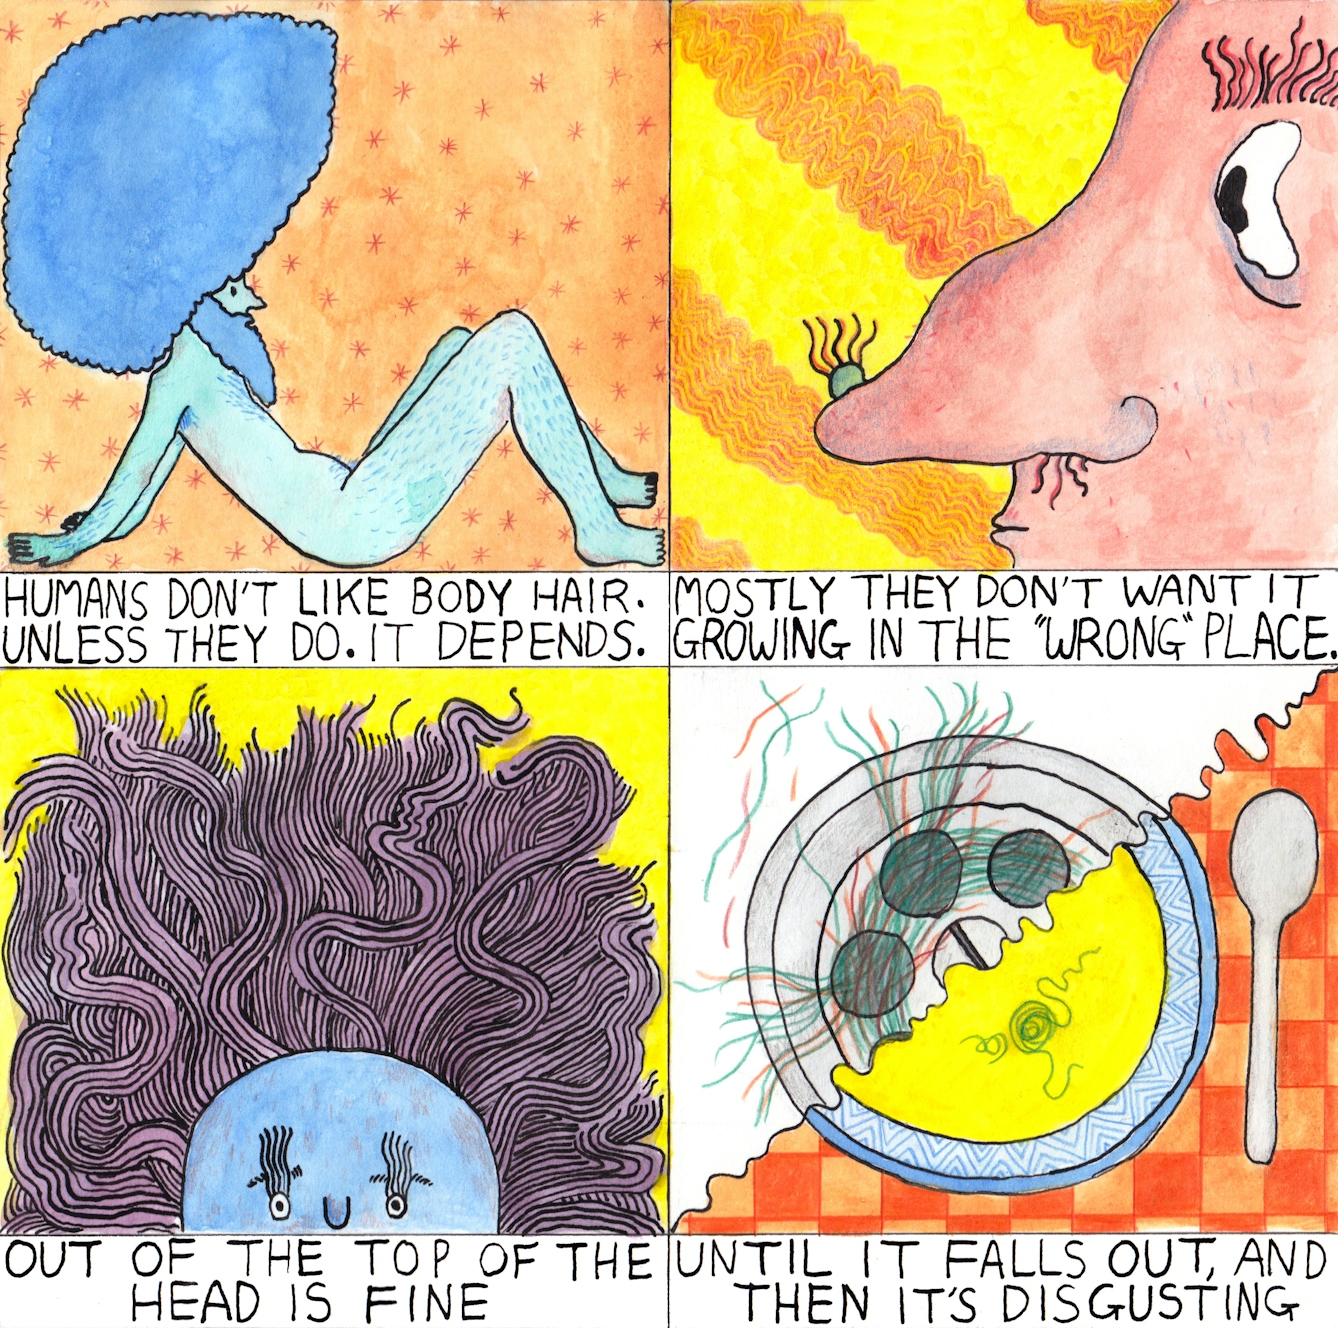 Comic about hair, and where and when humans find their hair acceptable or unpleasant. 